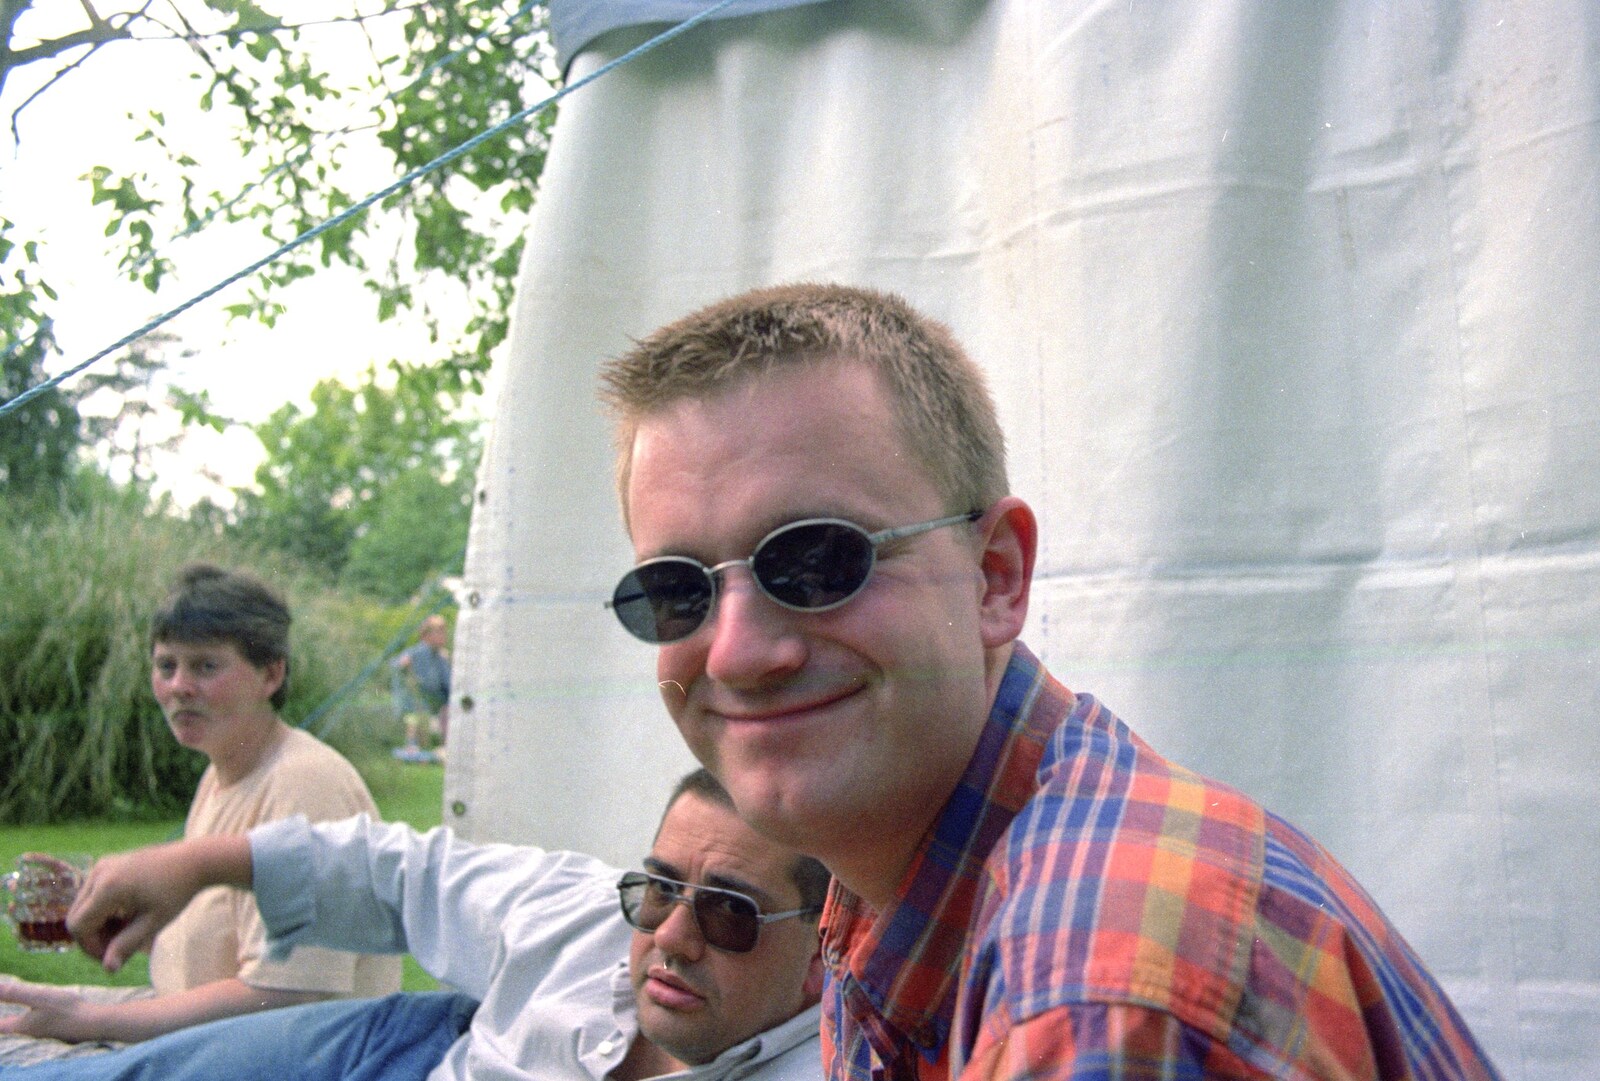 Nosher and his shades from The Brome Swan at Keith's 50th, Thrandeston, Suffolk  - June 2nd 1998